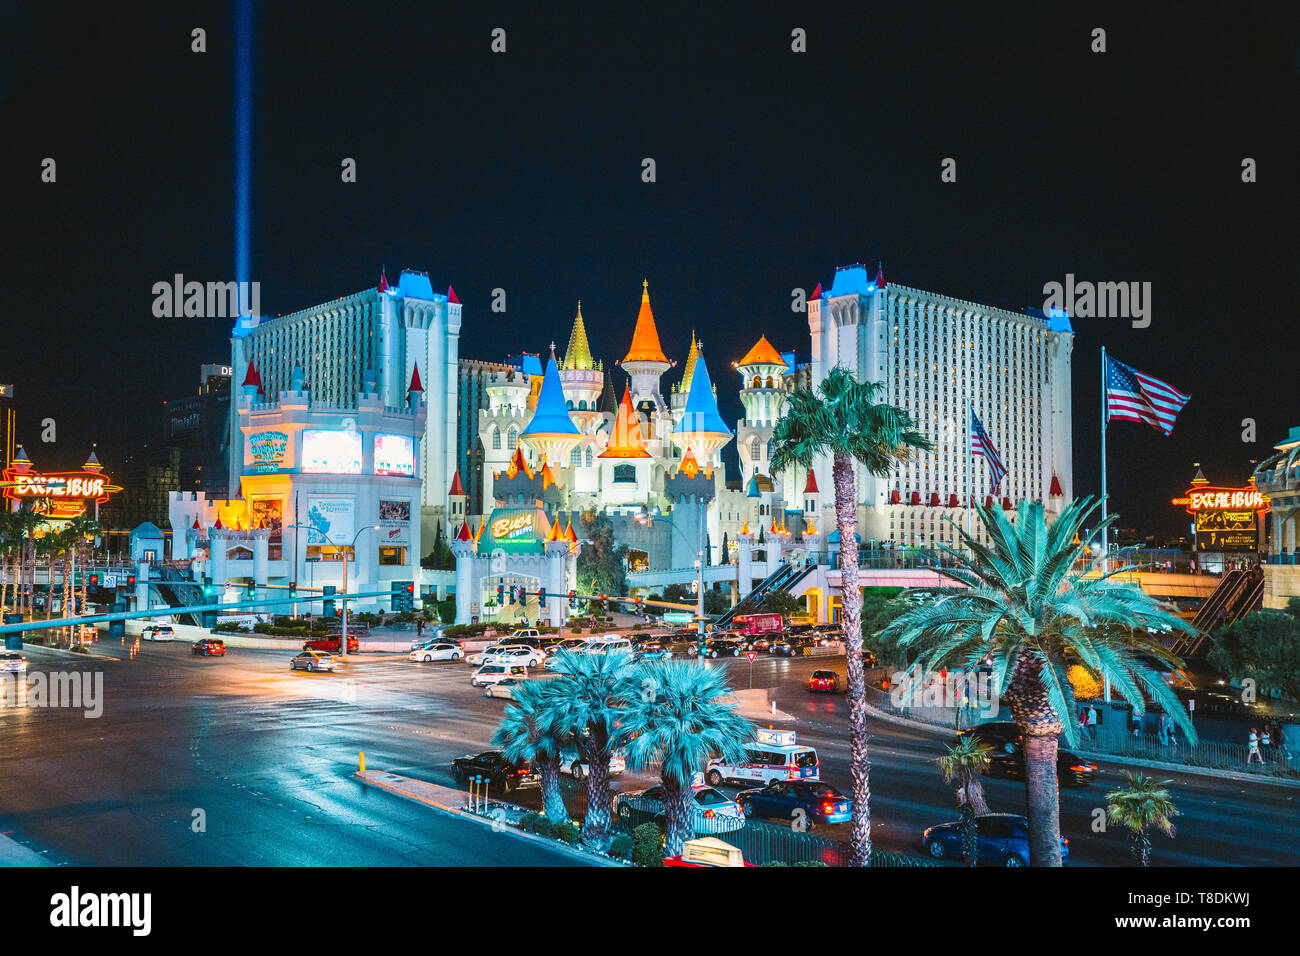 LAS VEGAS, USA - September 20, 2016: Colorful Downtown Las Vegas with world famous Strip and Excalibur hotel and casino complex illuminated beautifull Stock Photo